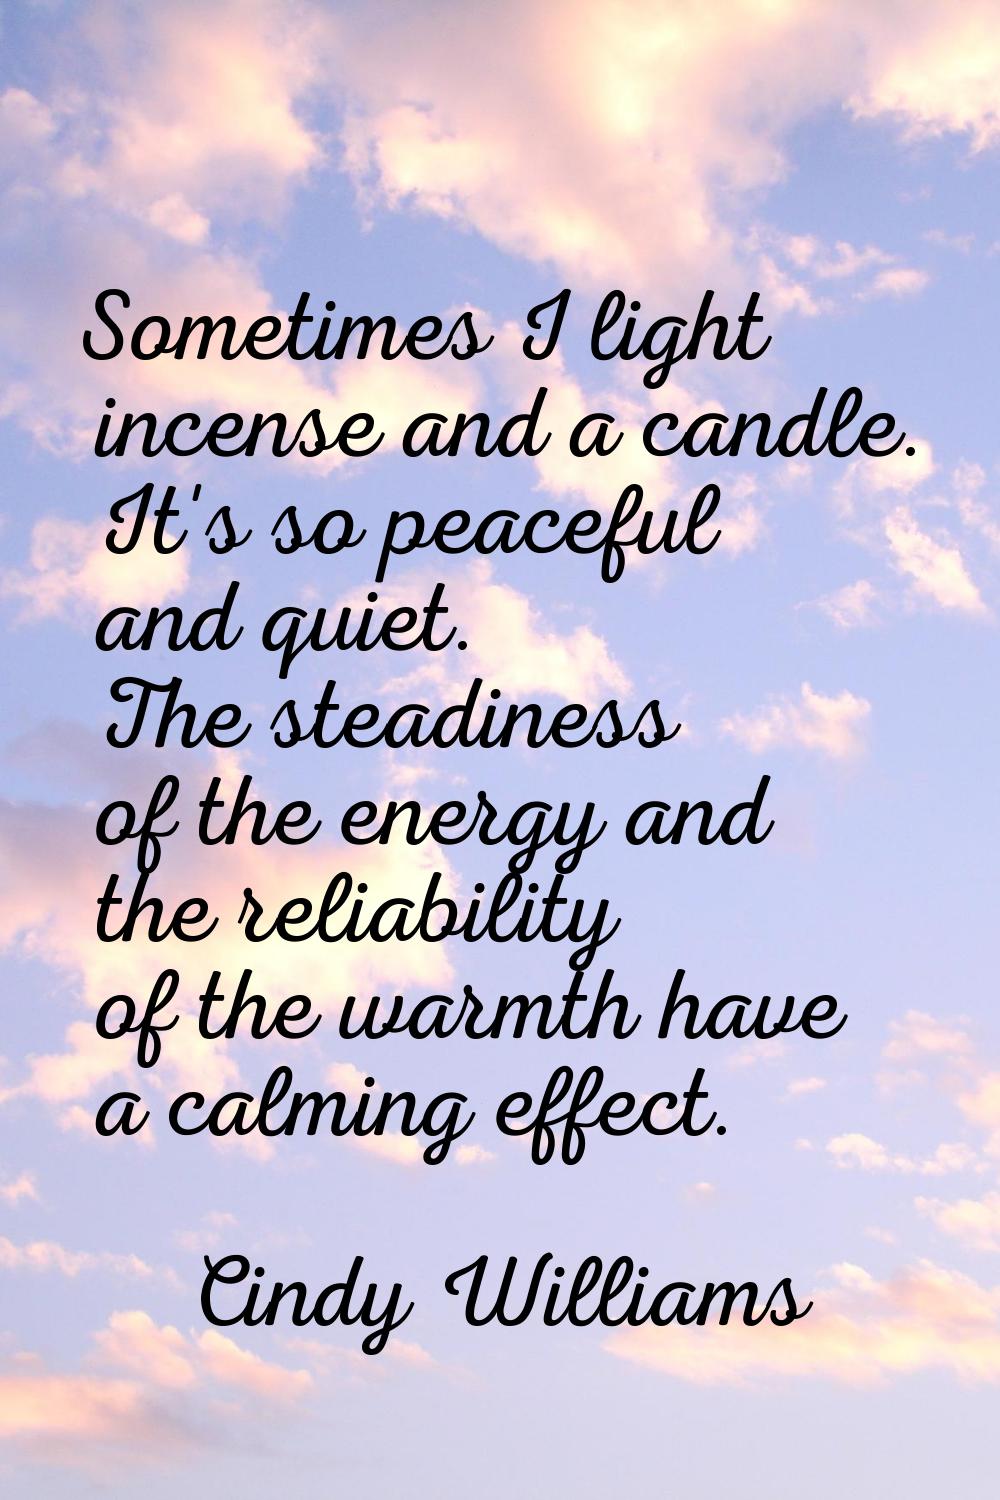 Sometimes I light incense and a candle. It's so peaceful and quiet. The steadiness of the energy an